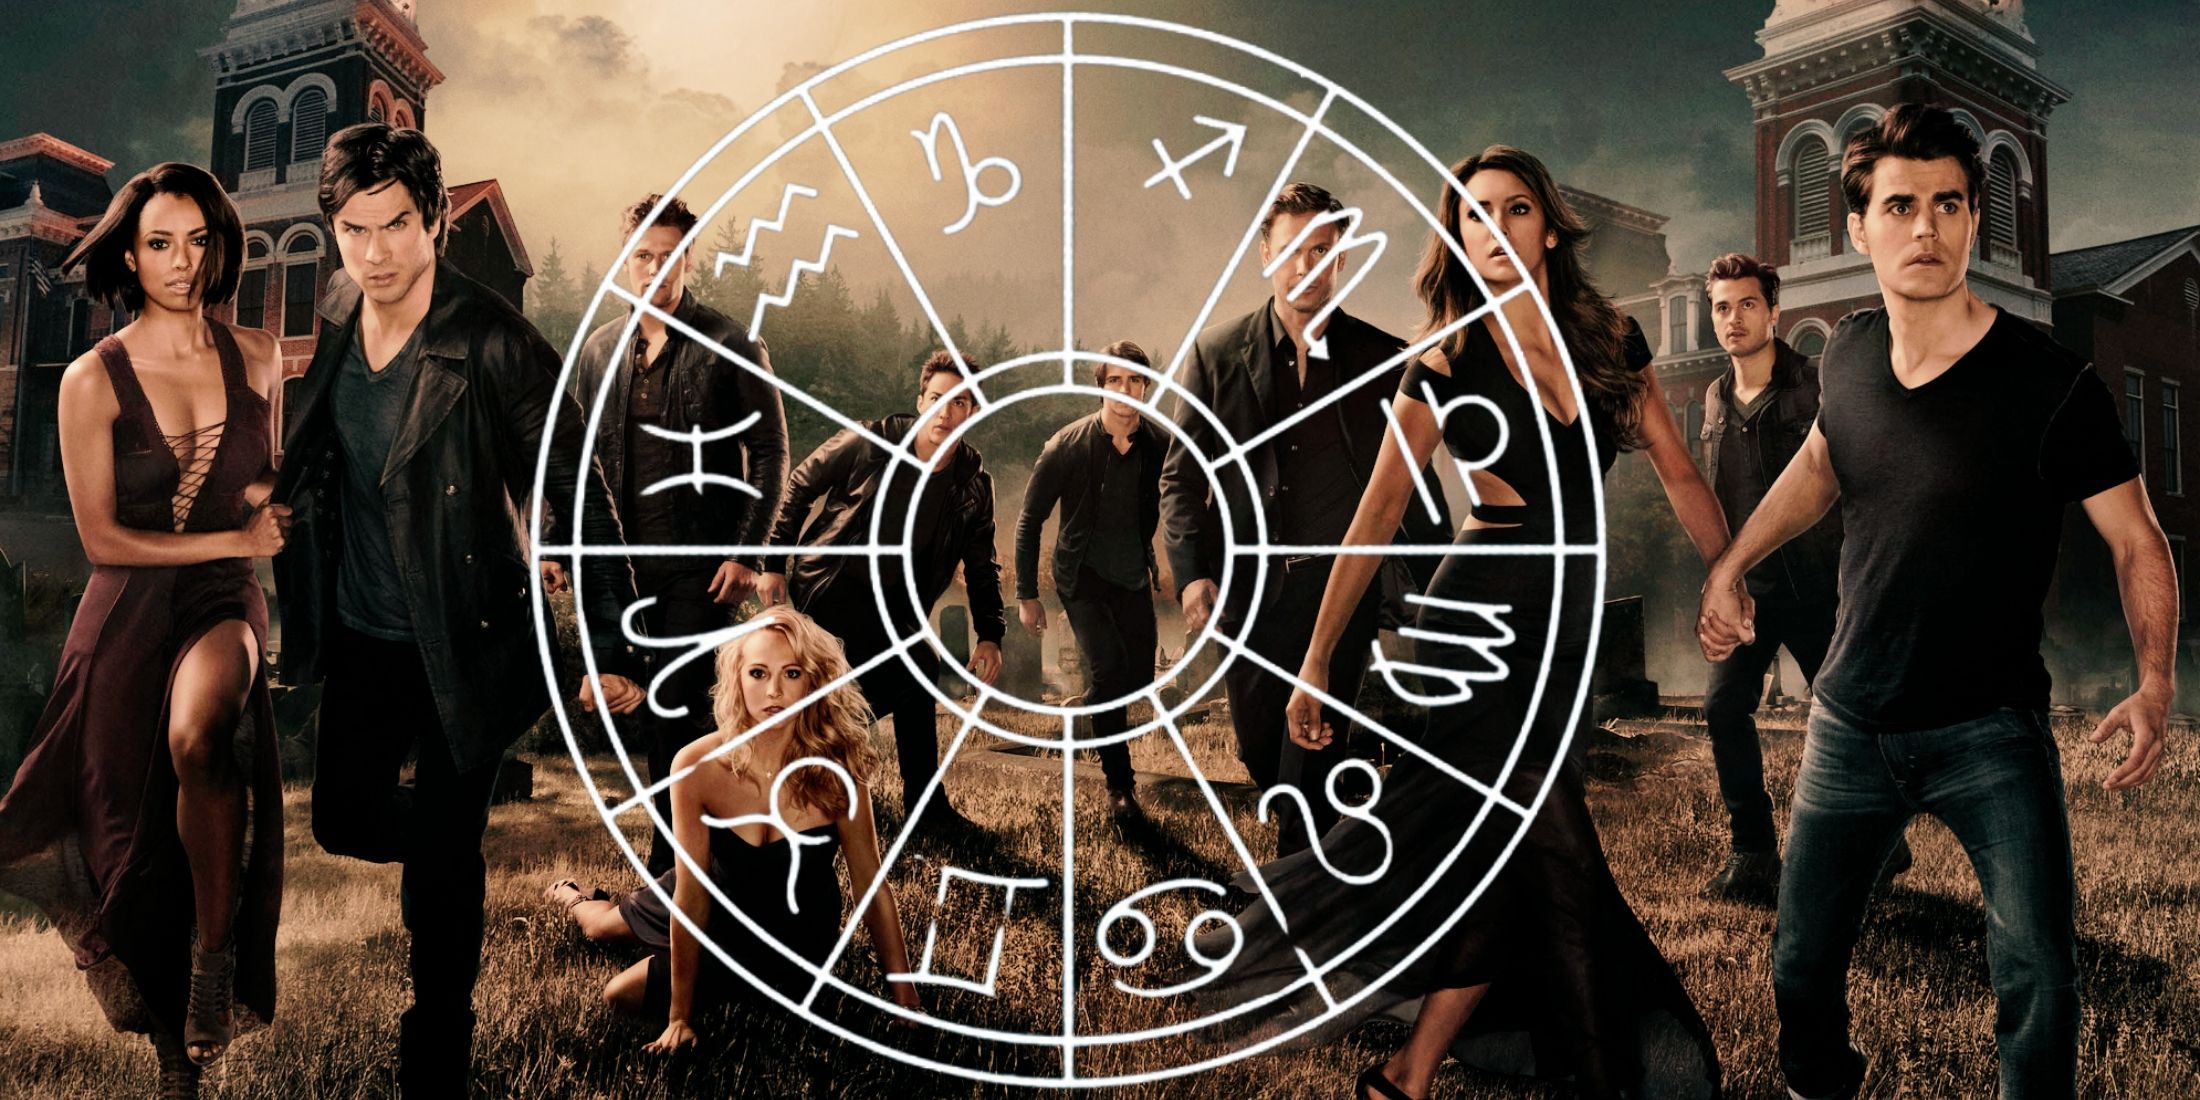 The cast of The Vampire Diaries behind a white Zodiac wheel